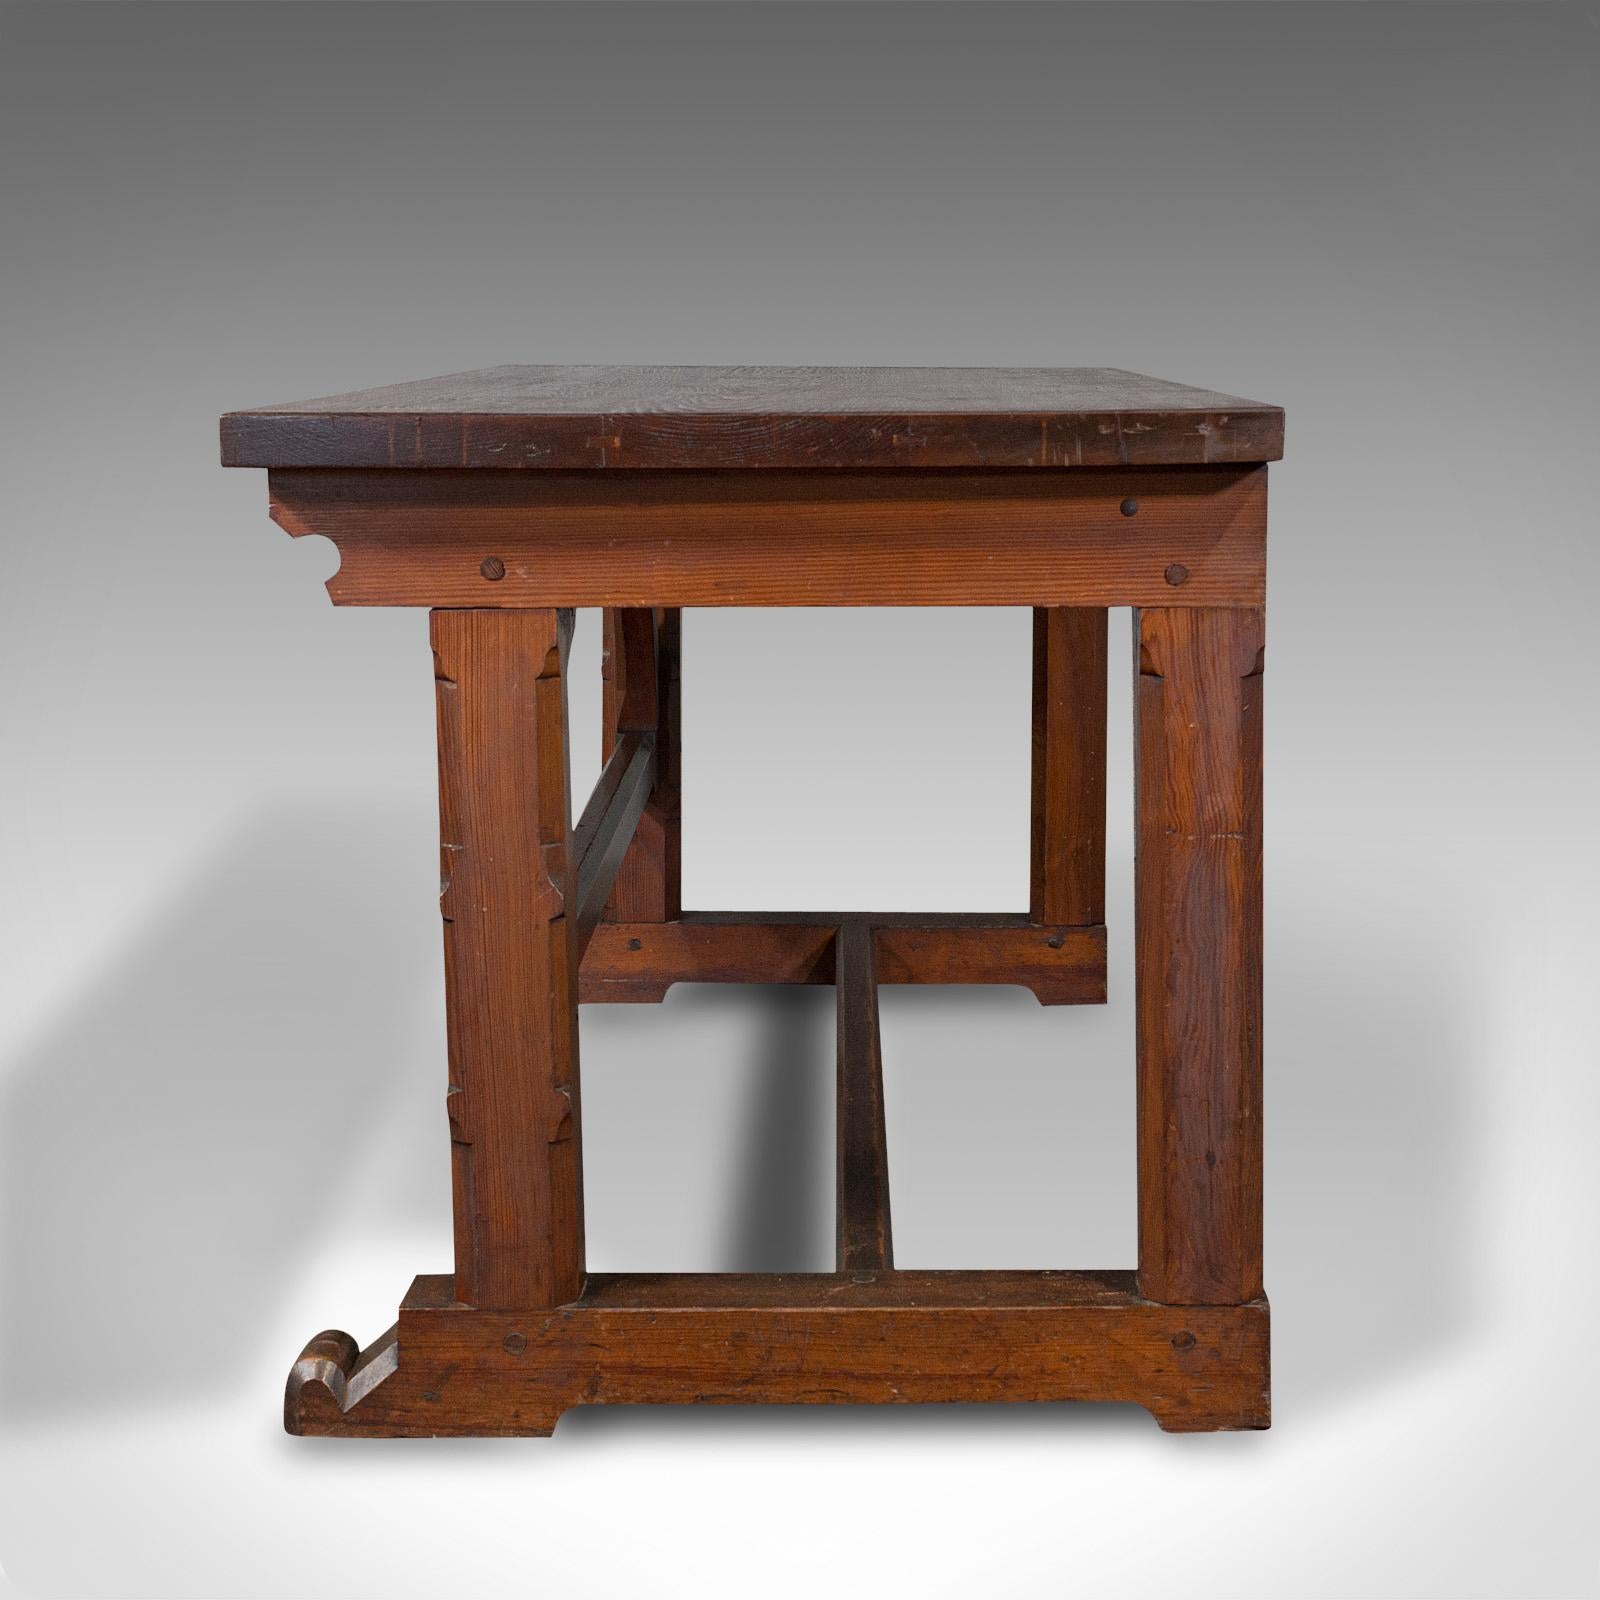 British Antique Serving Table, English, Pitch Pine, Pugin, Ecclesiastical, Victorian For Sale